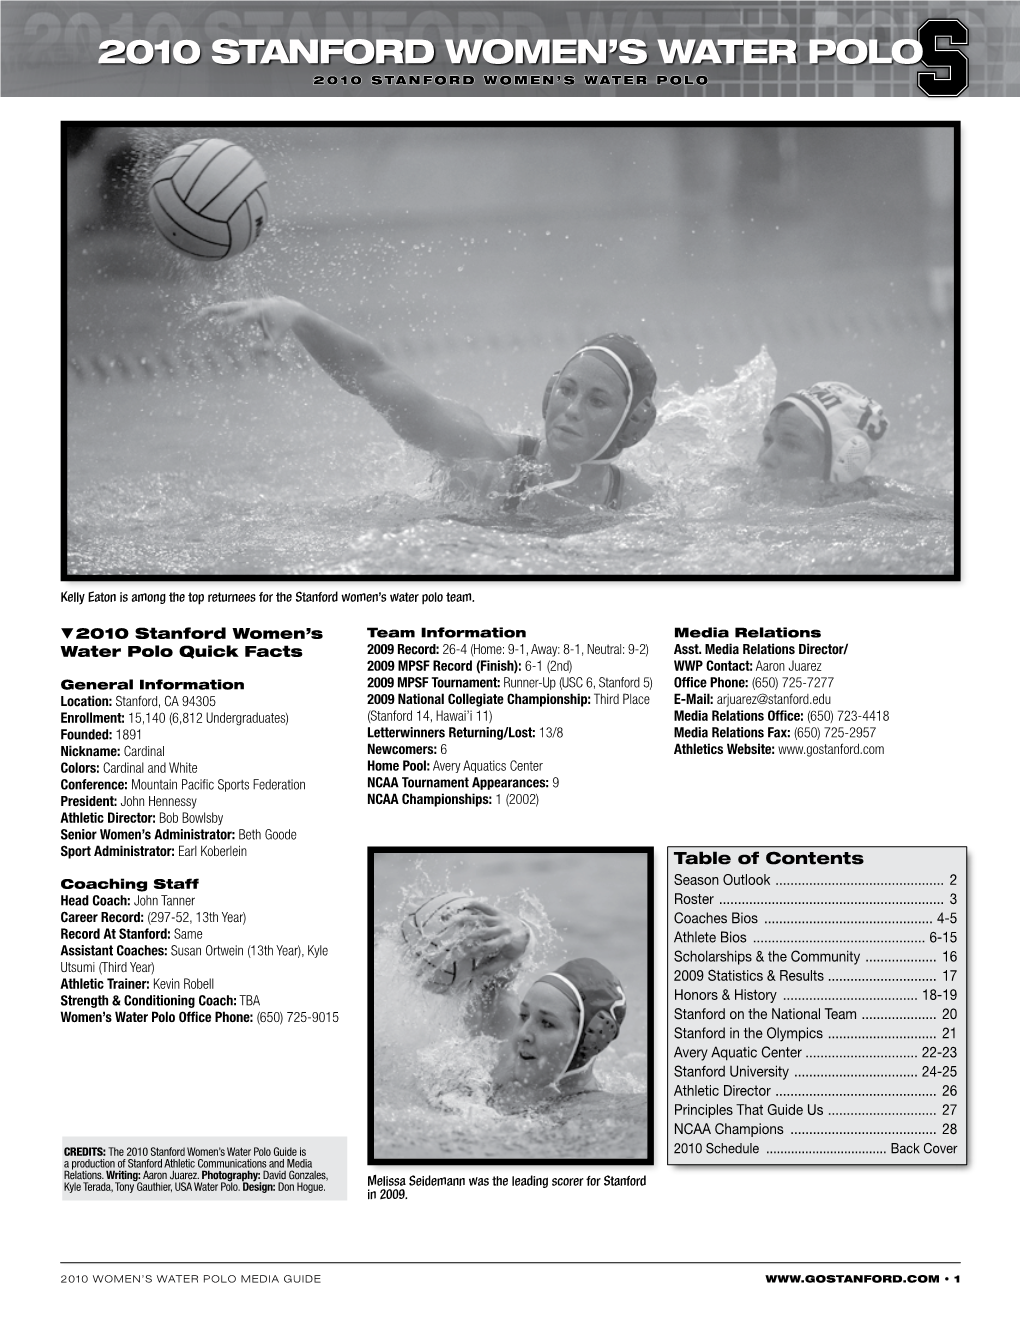 2010 Stanford Women's Water Polo